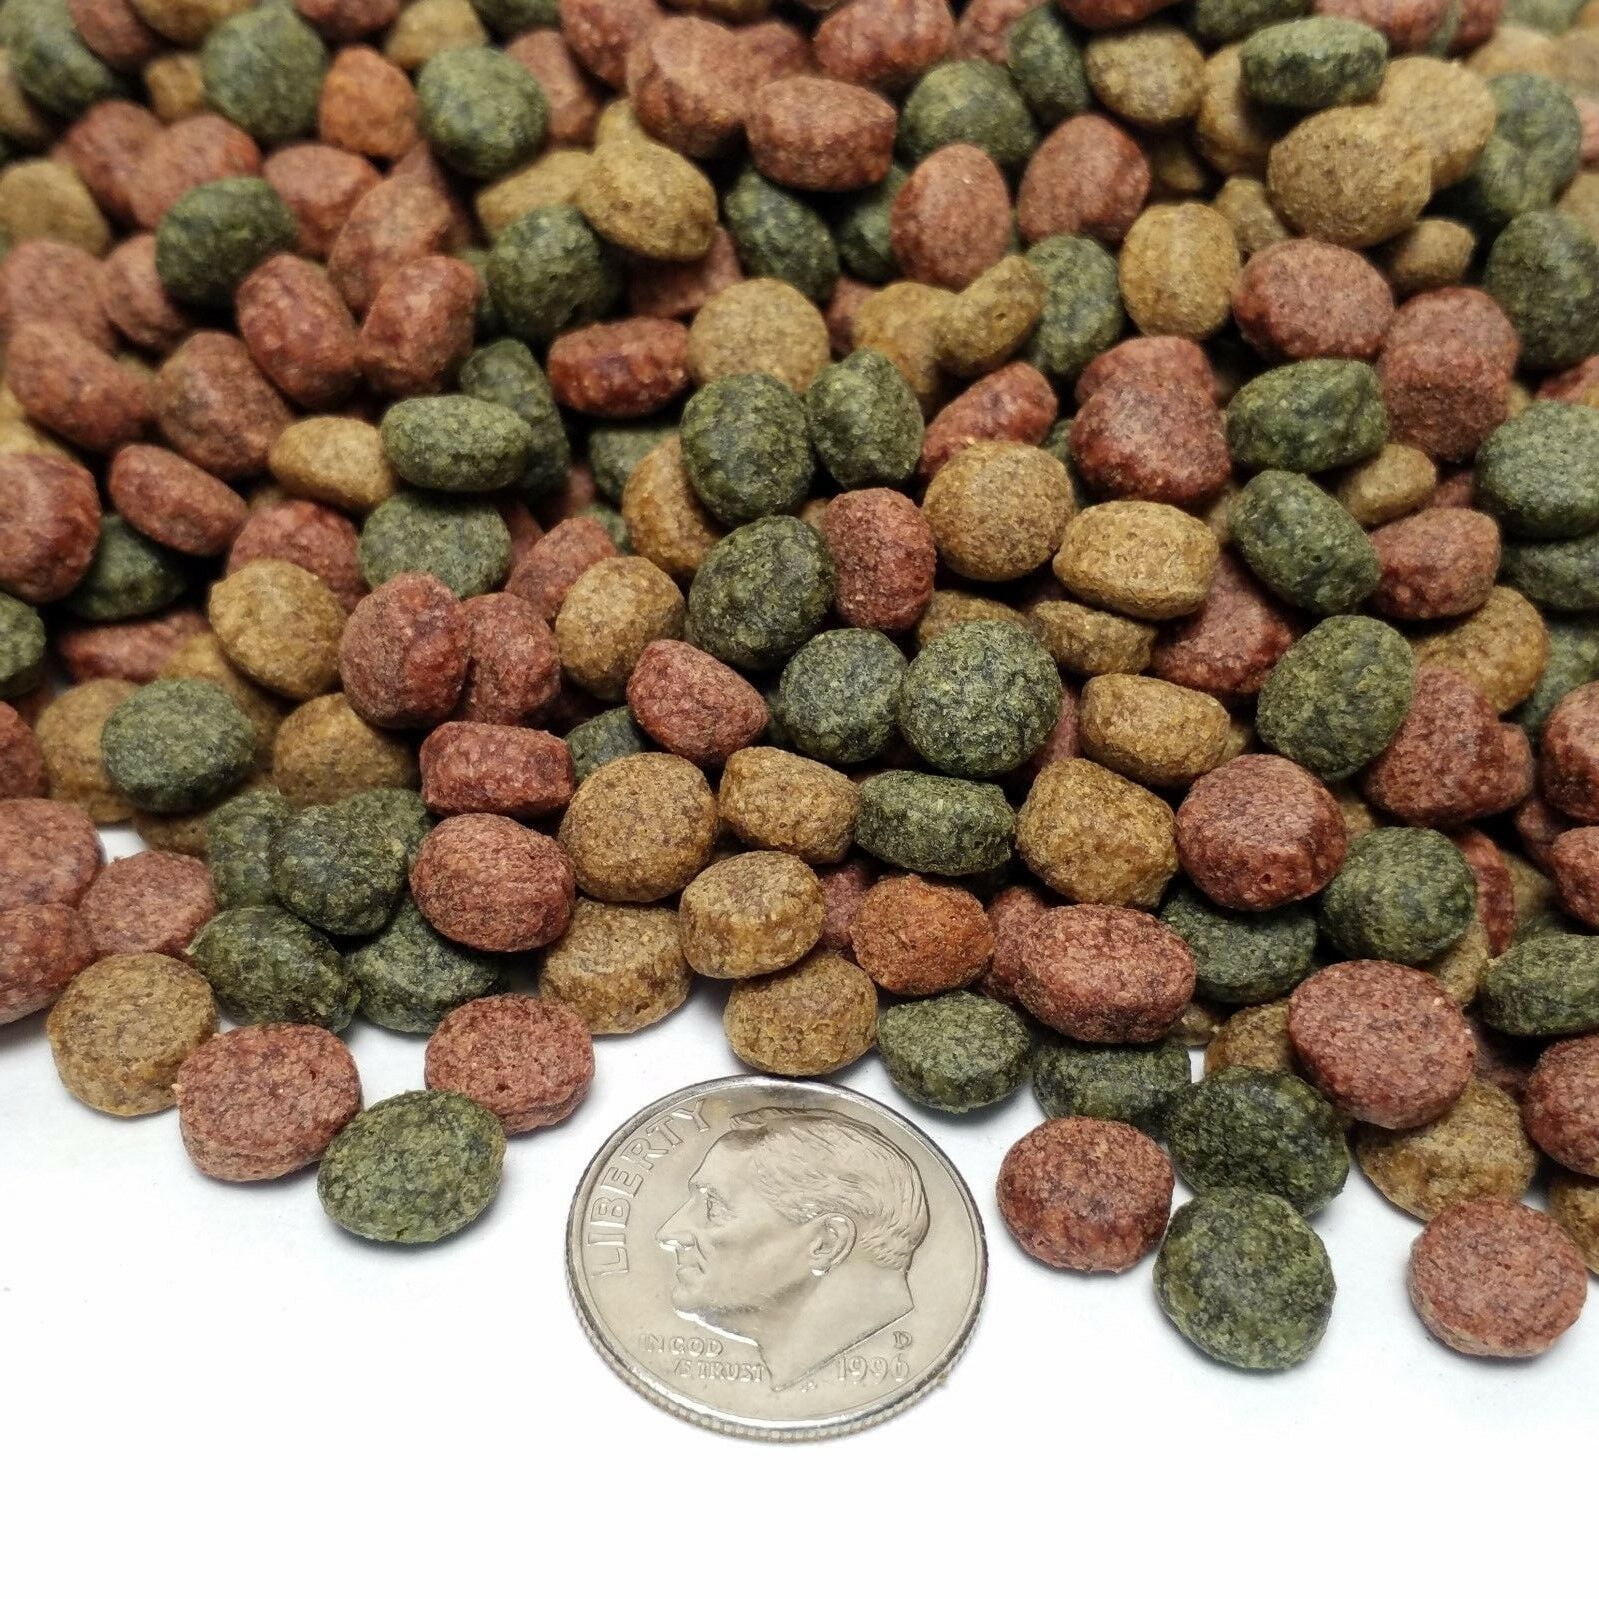 KGM-450 Koi 3-Type Mix Green Gro, Color Red & Silkworm Floating Pellets (Apx 6mm-1/4")…3-lbs